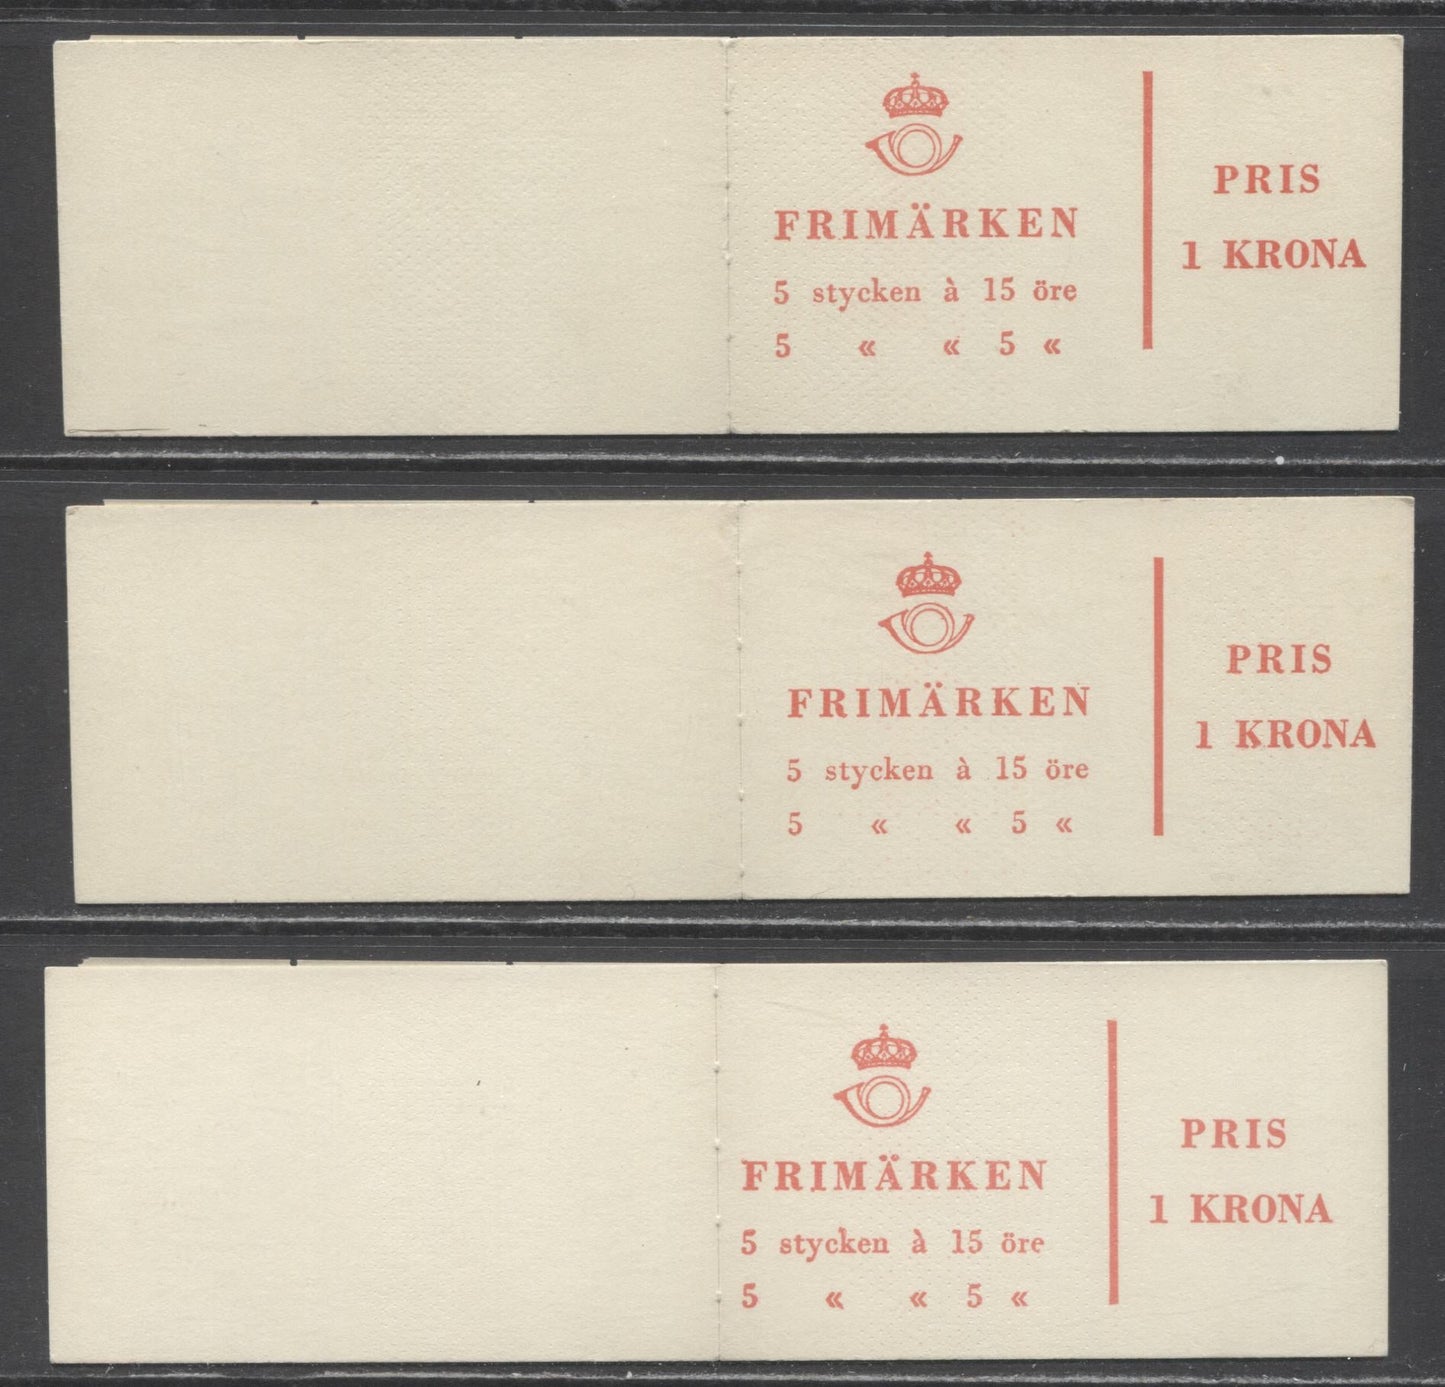 Lot 159 Sweden SC#581b (Facit #HA7OH)/581b (Facit #HA7OH) 1961 Re-Engraved King Gustav VI Adolf Definitive Issue, With three Different Selvedge Markings, Inverted Panes, 5 Ore Stamps on Right, , 3 VFNH Booklets of 10 (5 +5), Estimated Value $10